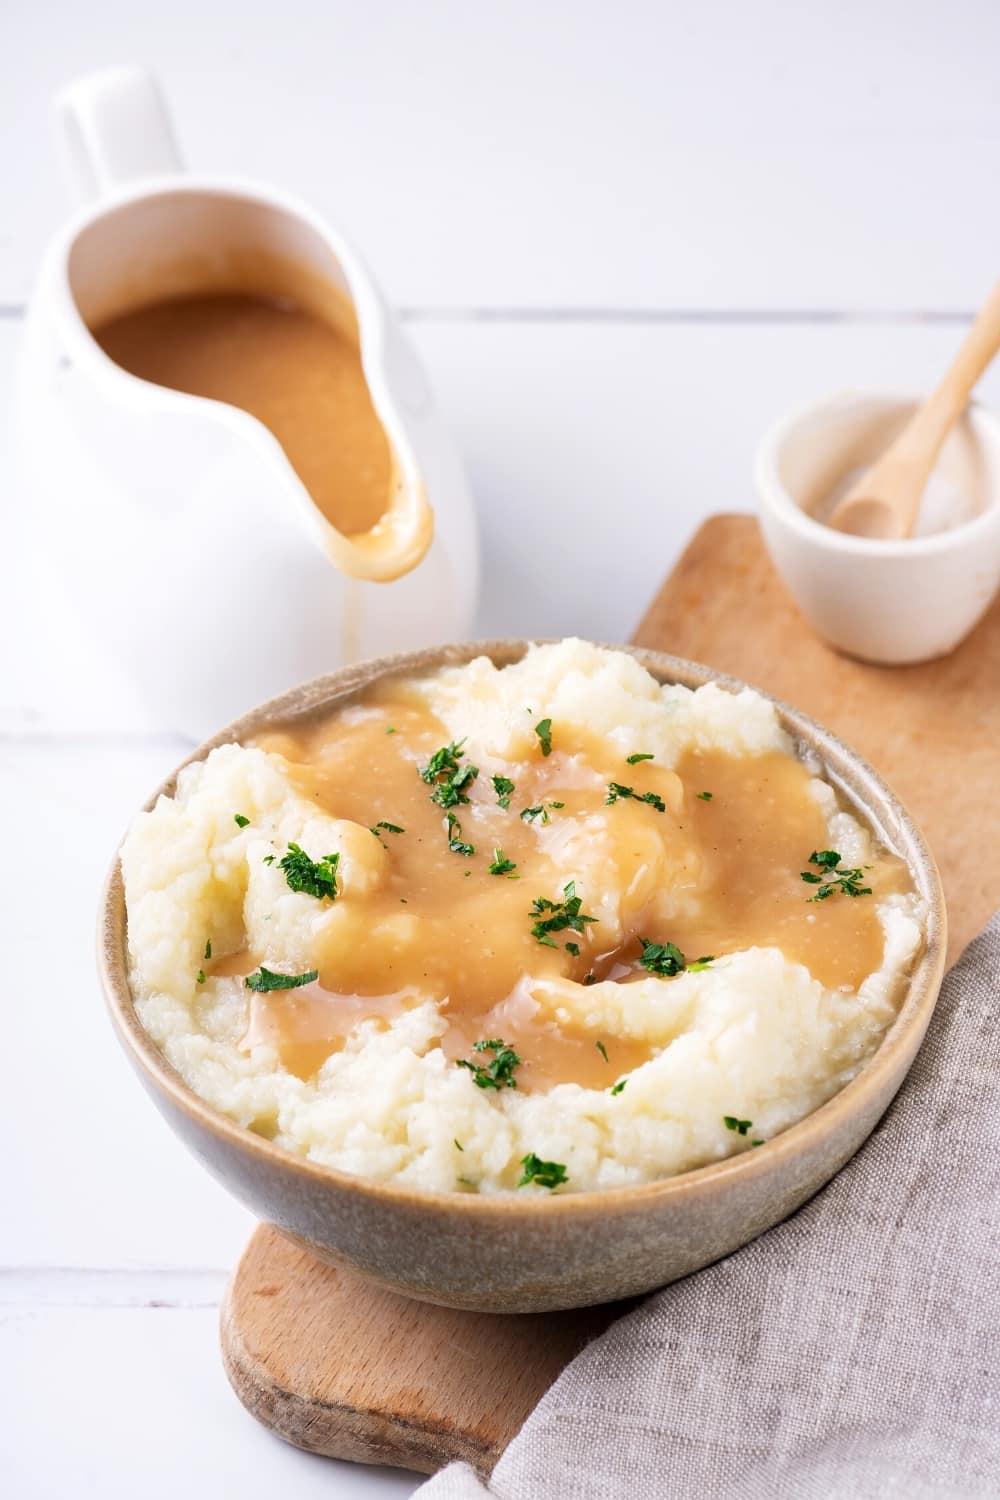 A bowl of mashed potatoes covered in gravy on a wooden cutting board. Behind the bowl on the white counter is a ladle filled with gravy.